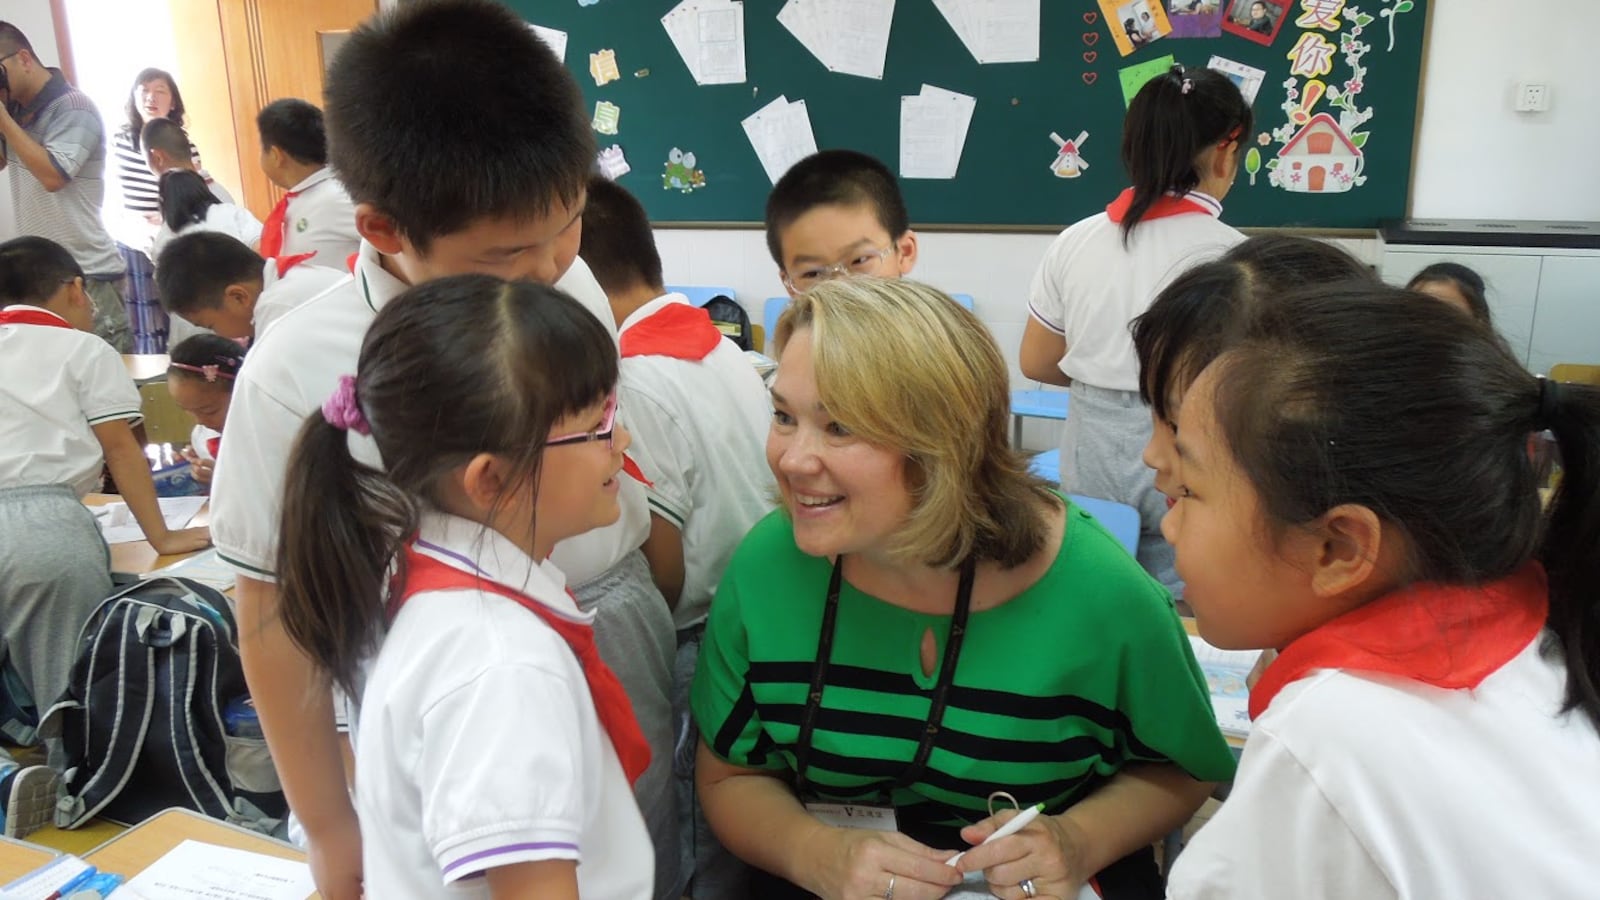 Beth Blevins, principal of South Doyle Middle, Knox County Schools, in Shanghai.